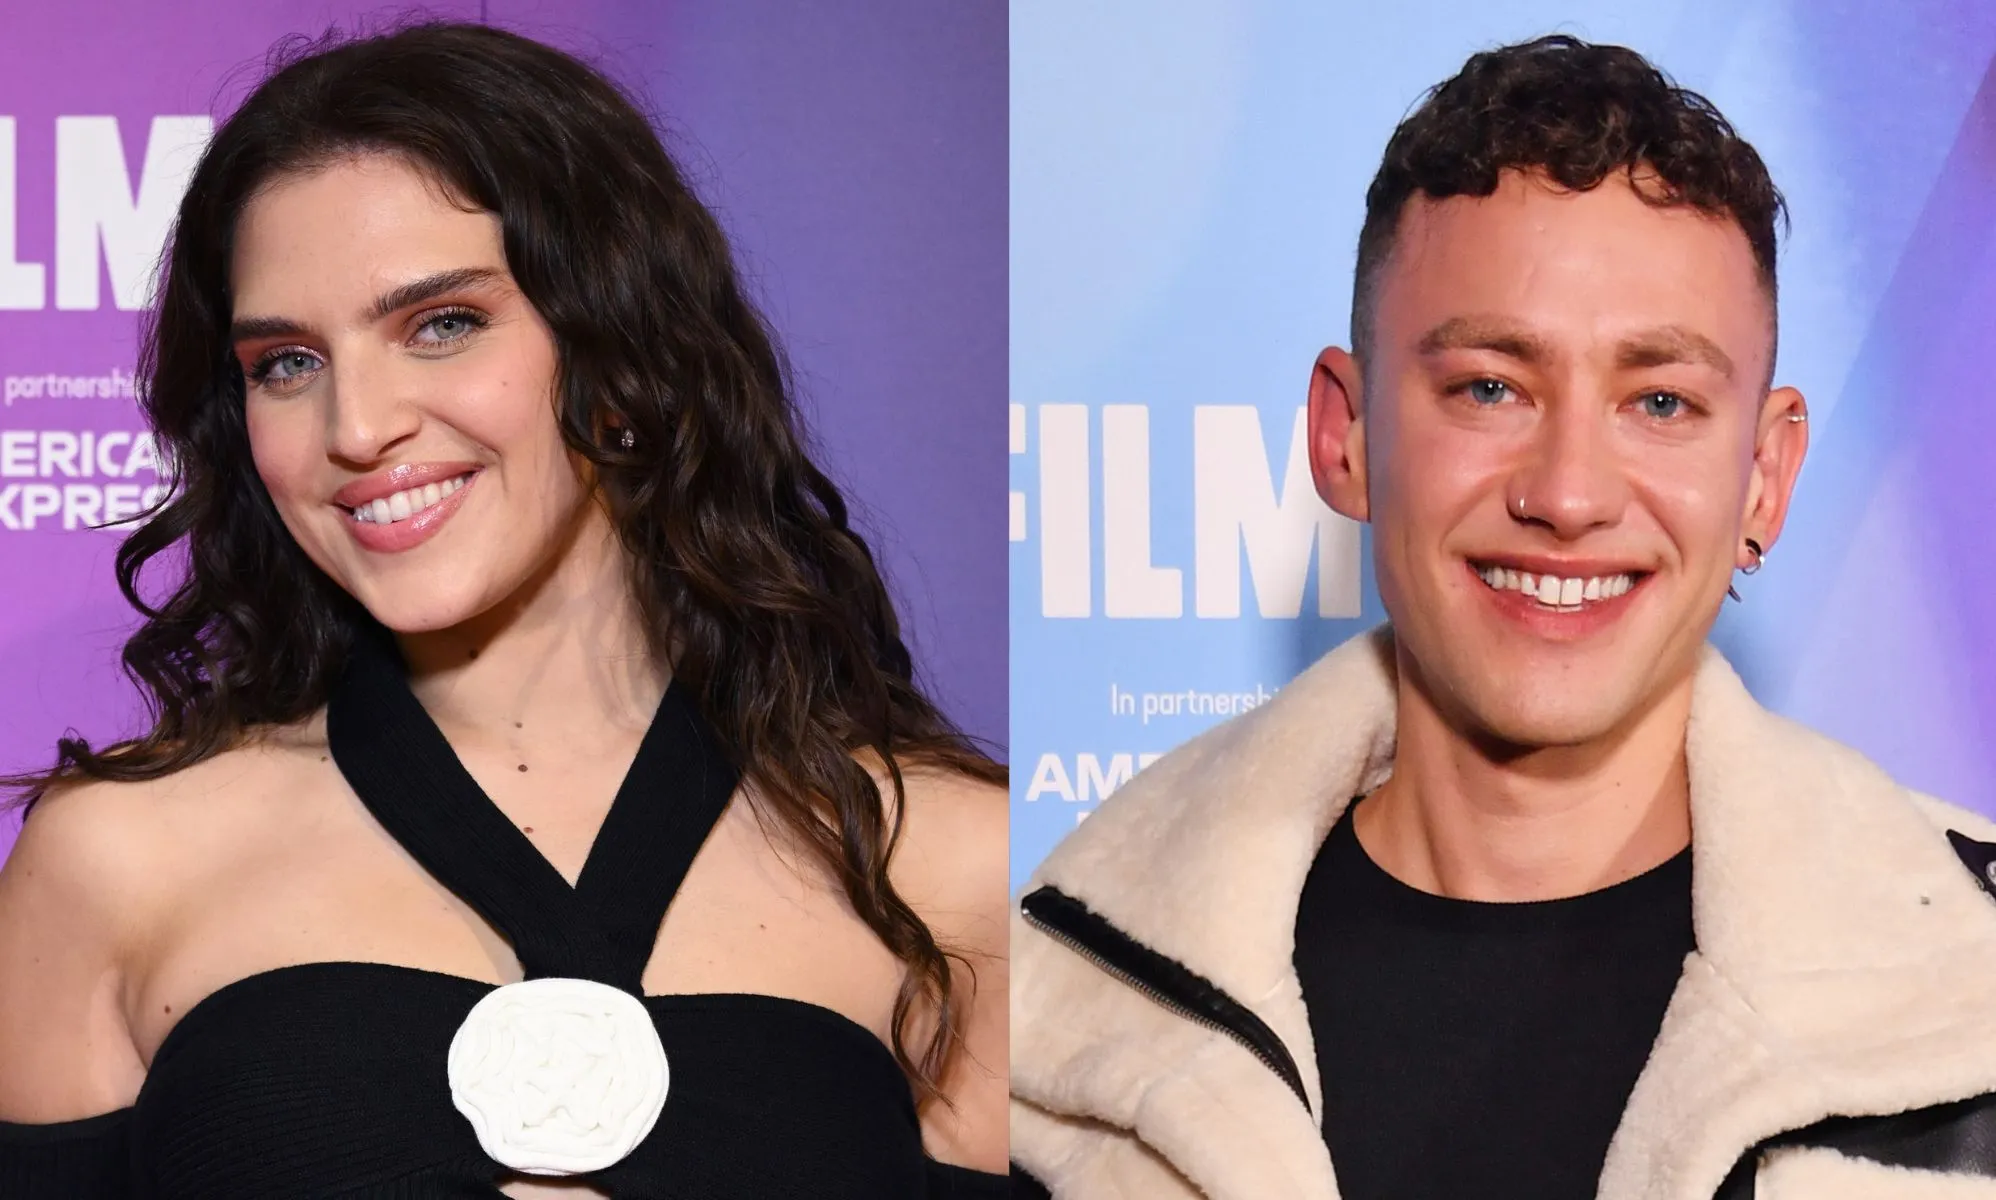 Mae Muller offers advice to Olly Alexander ahead of Eurovision: ‘Ignore the haters’